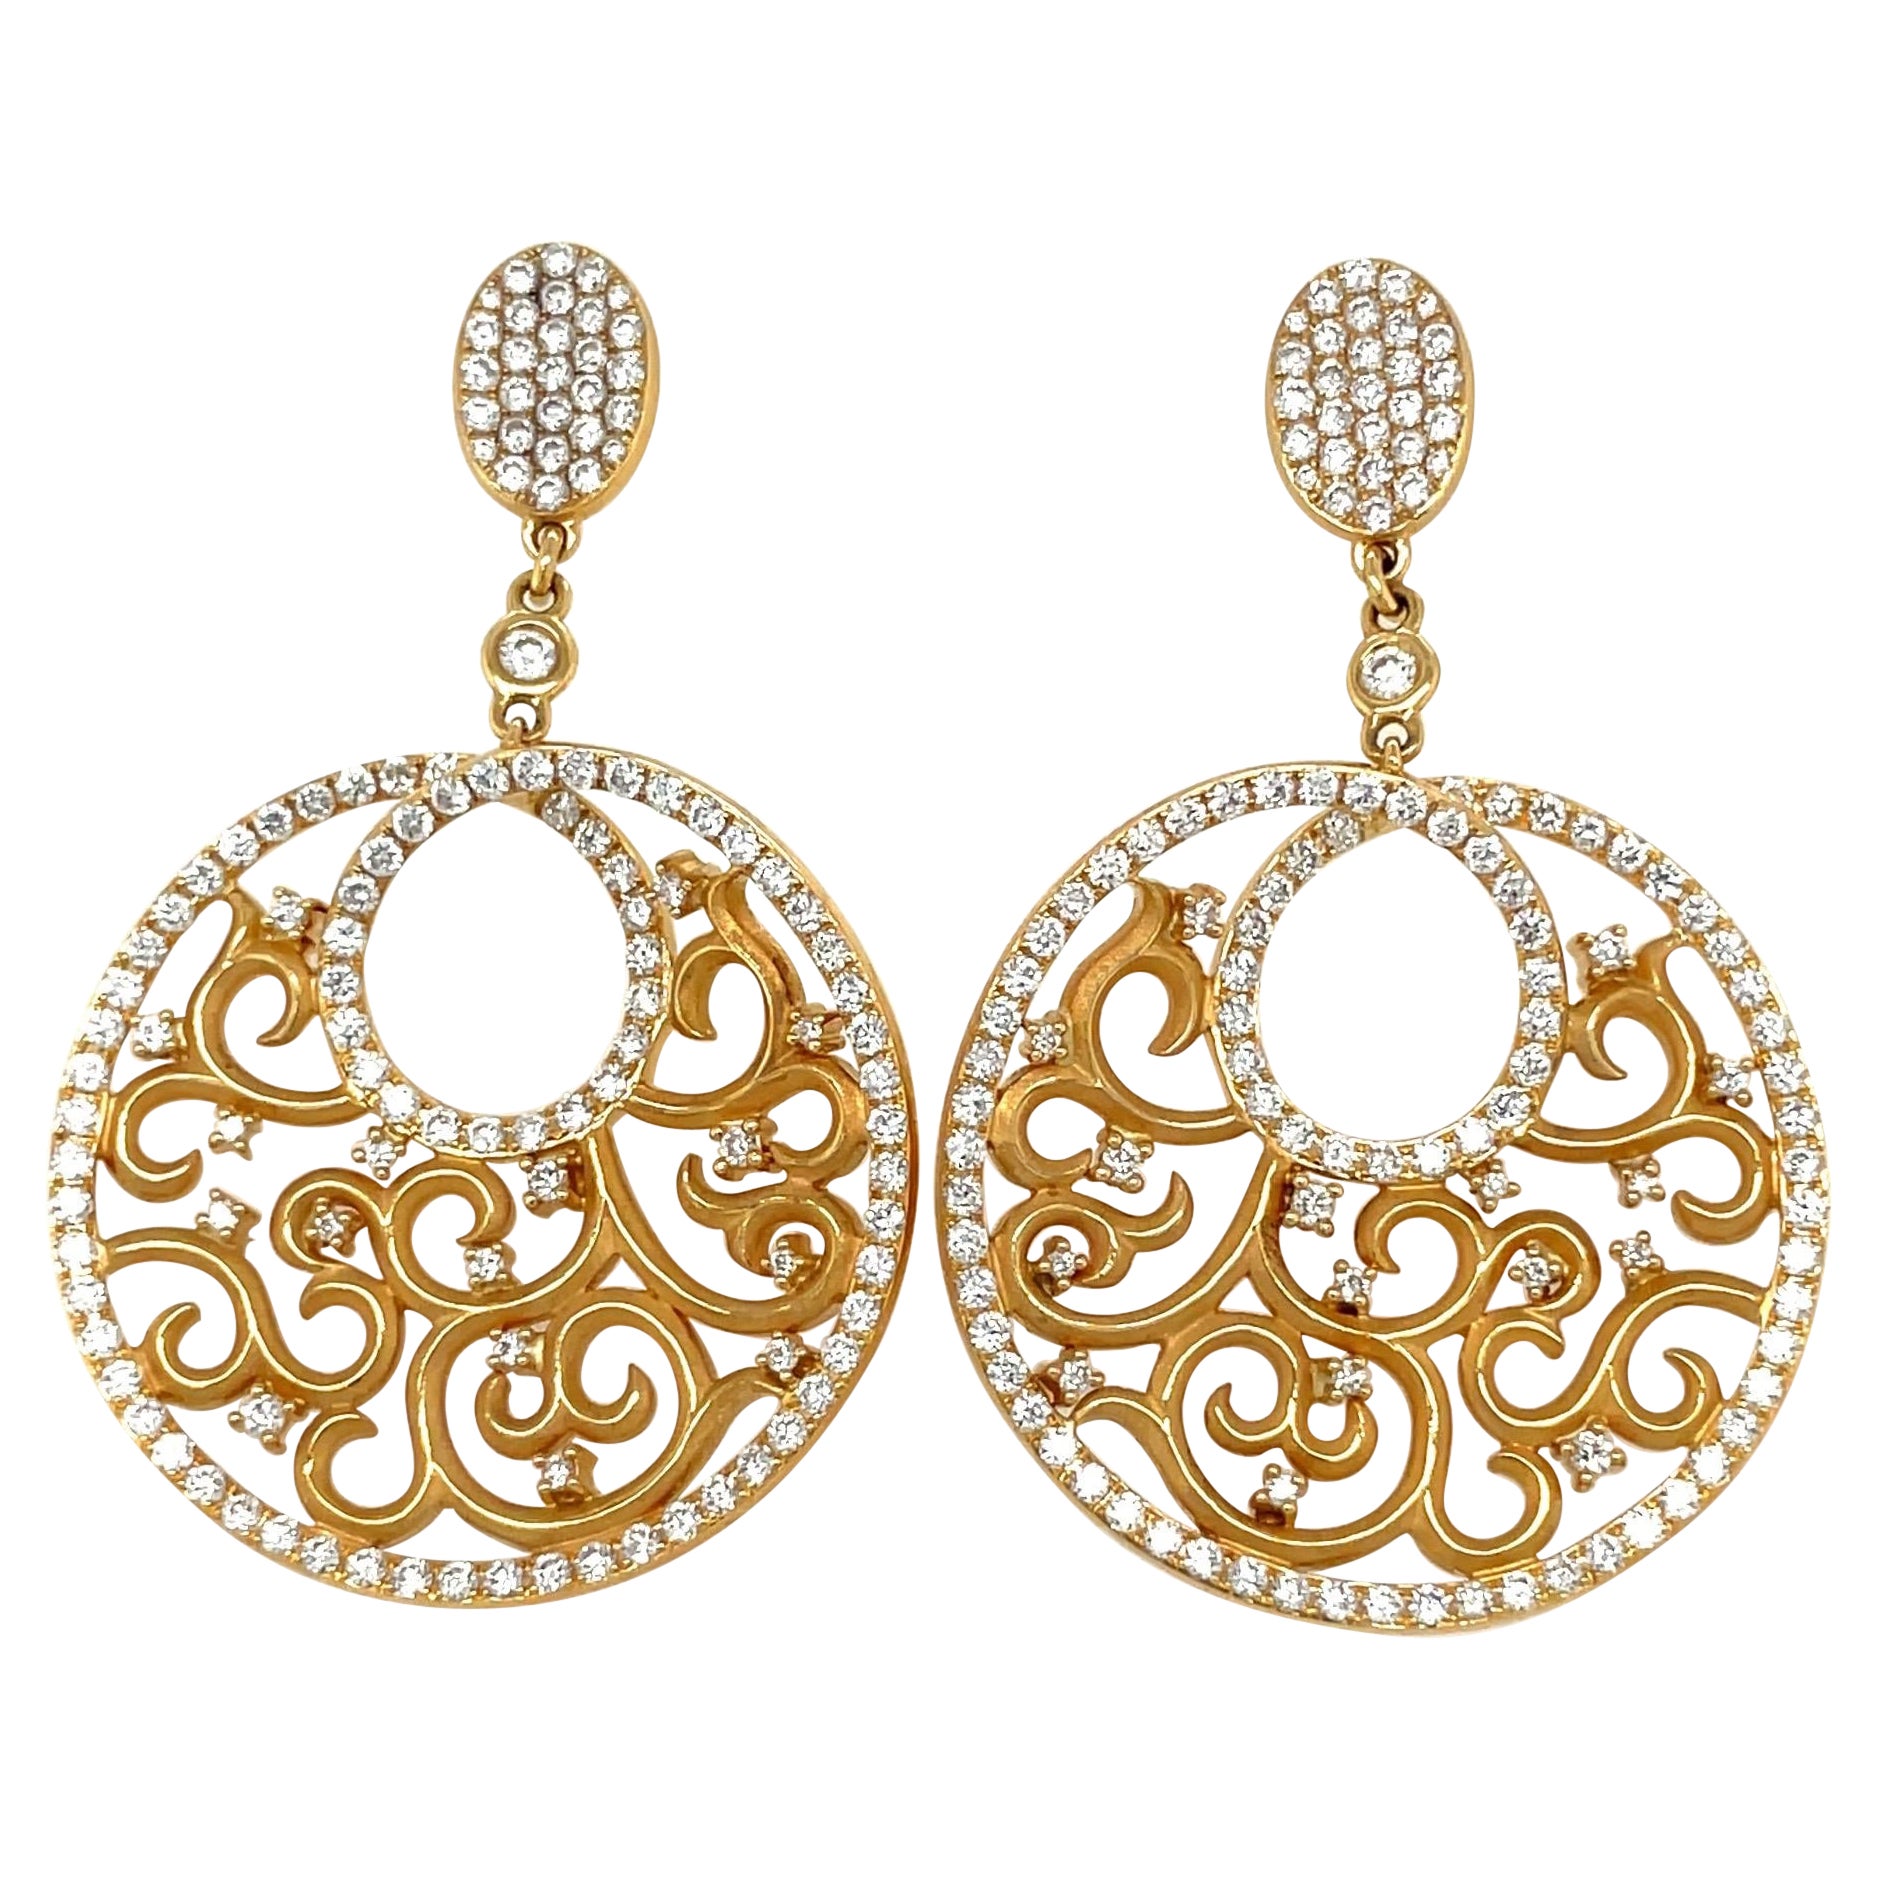 18KT Yellow Gold 1.67Ct Diamond Filigree Hanging Earrings For Sale